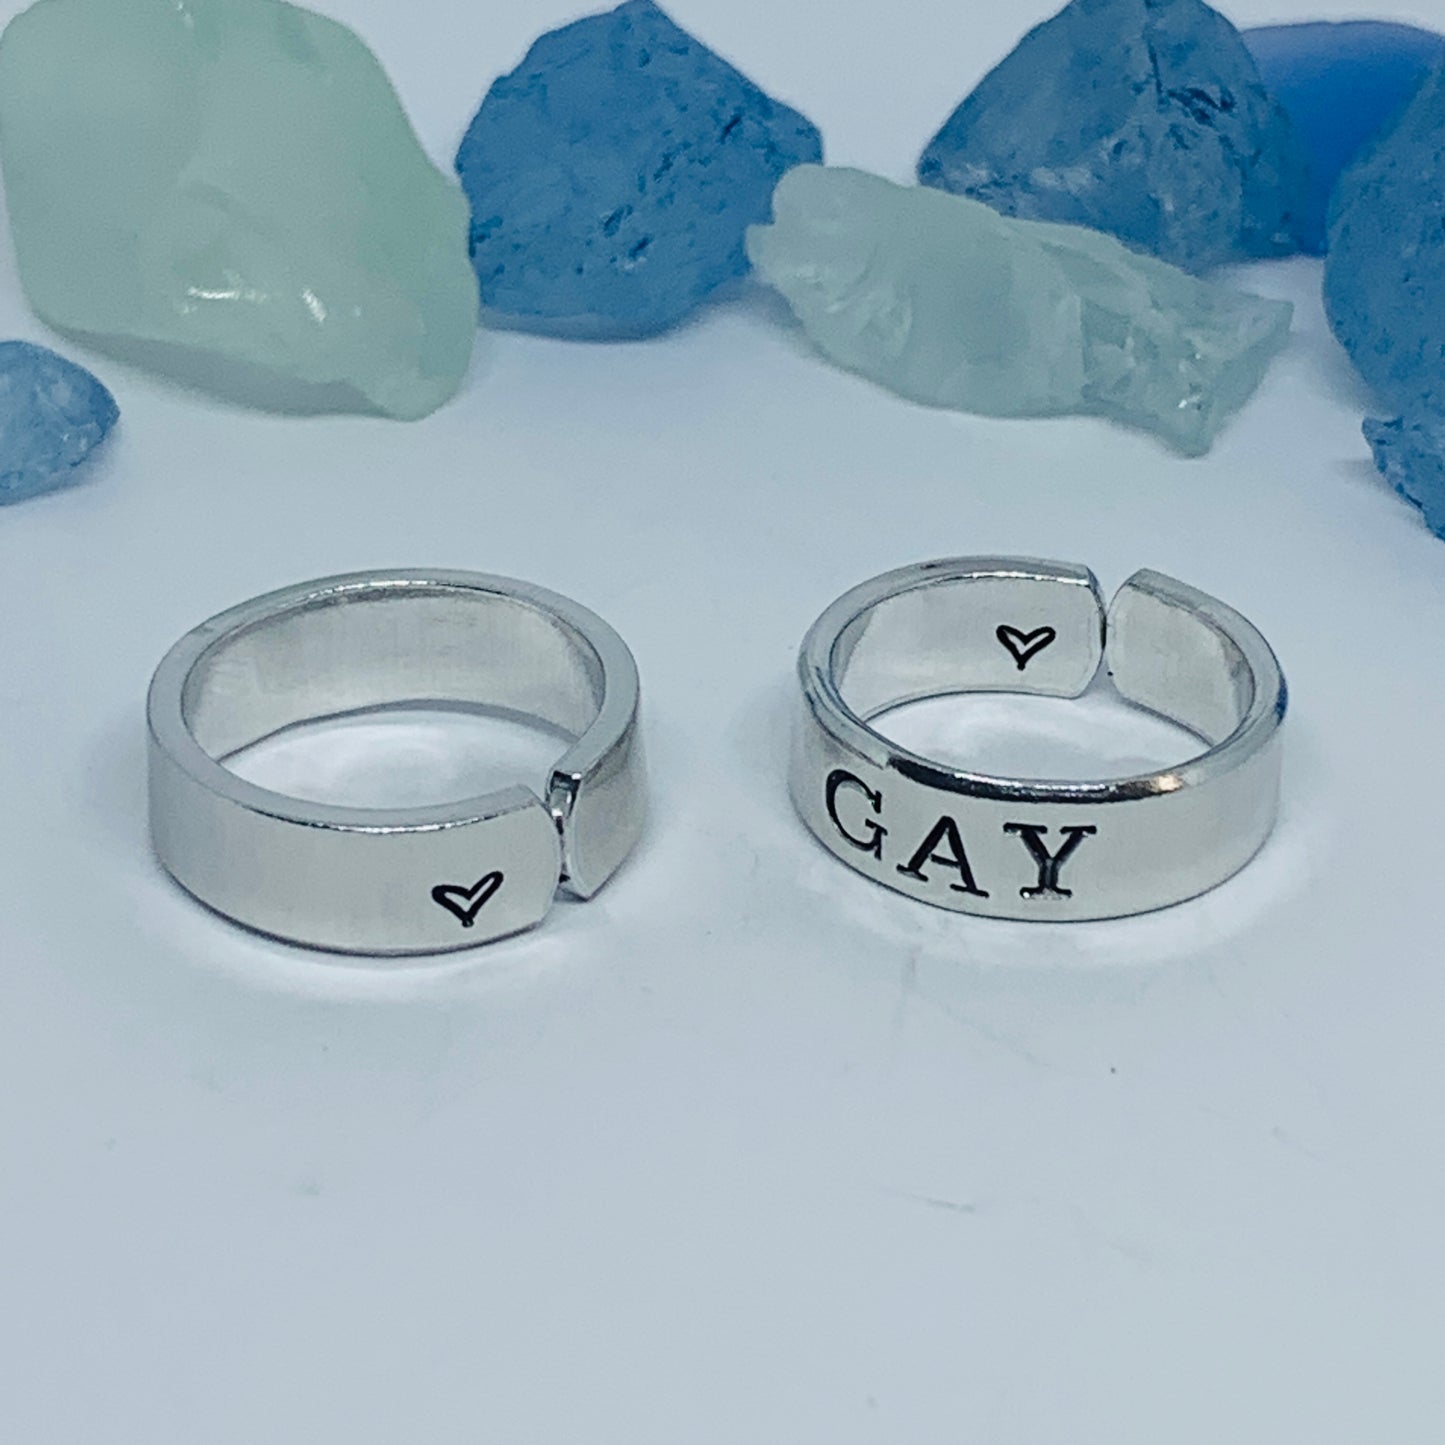 GAY Hand Stamped Ring | Proud LGBTQIA Ally Ring | Stamped Metal Cuff Ring | Gift for Them | LGBTQ Jewelry | Silence Ron DeSantis